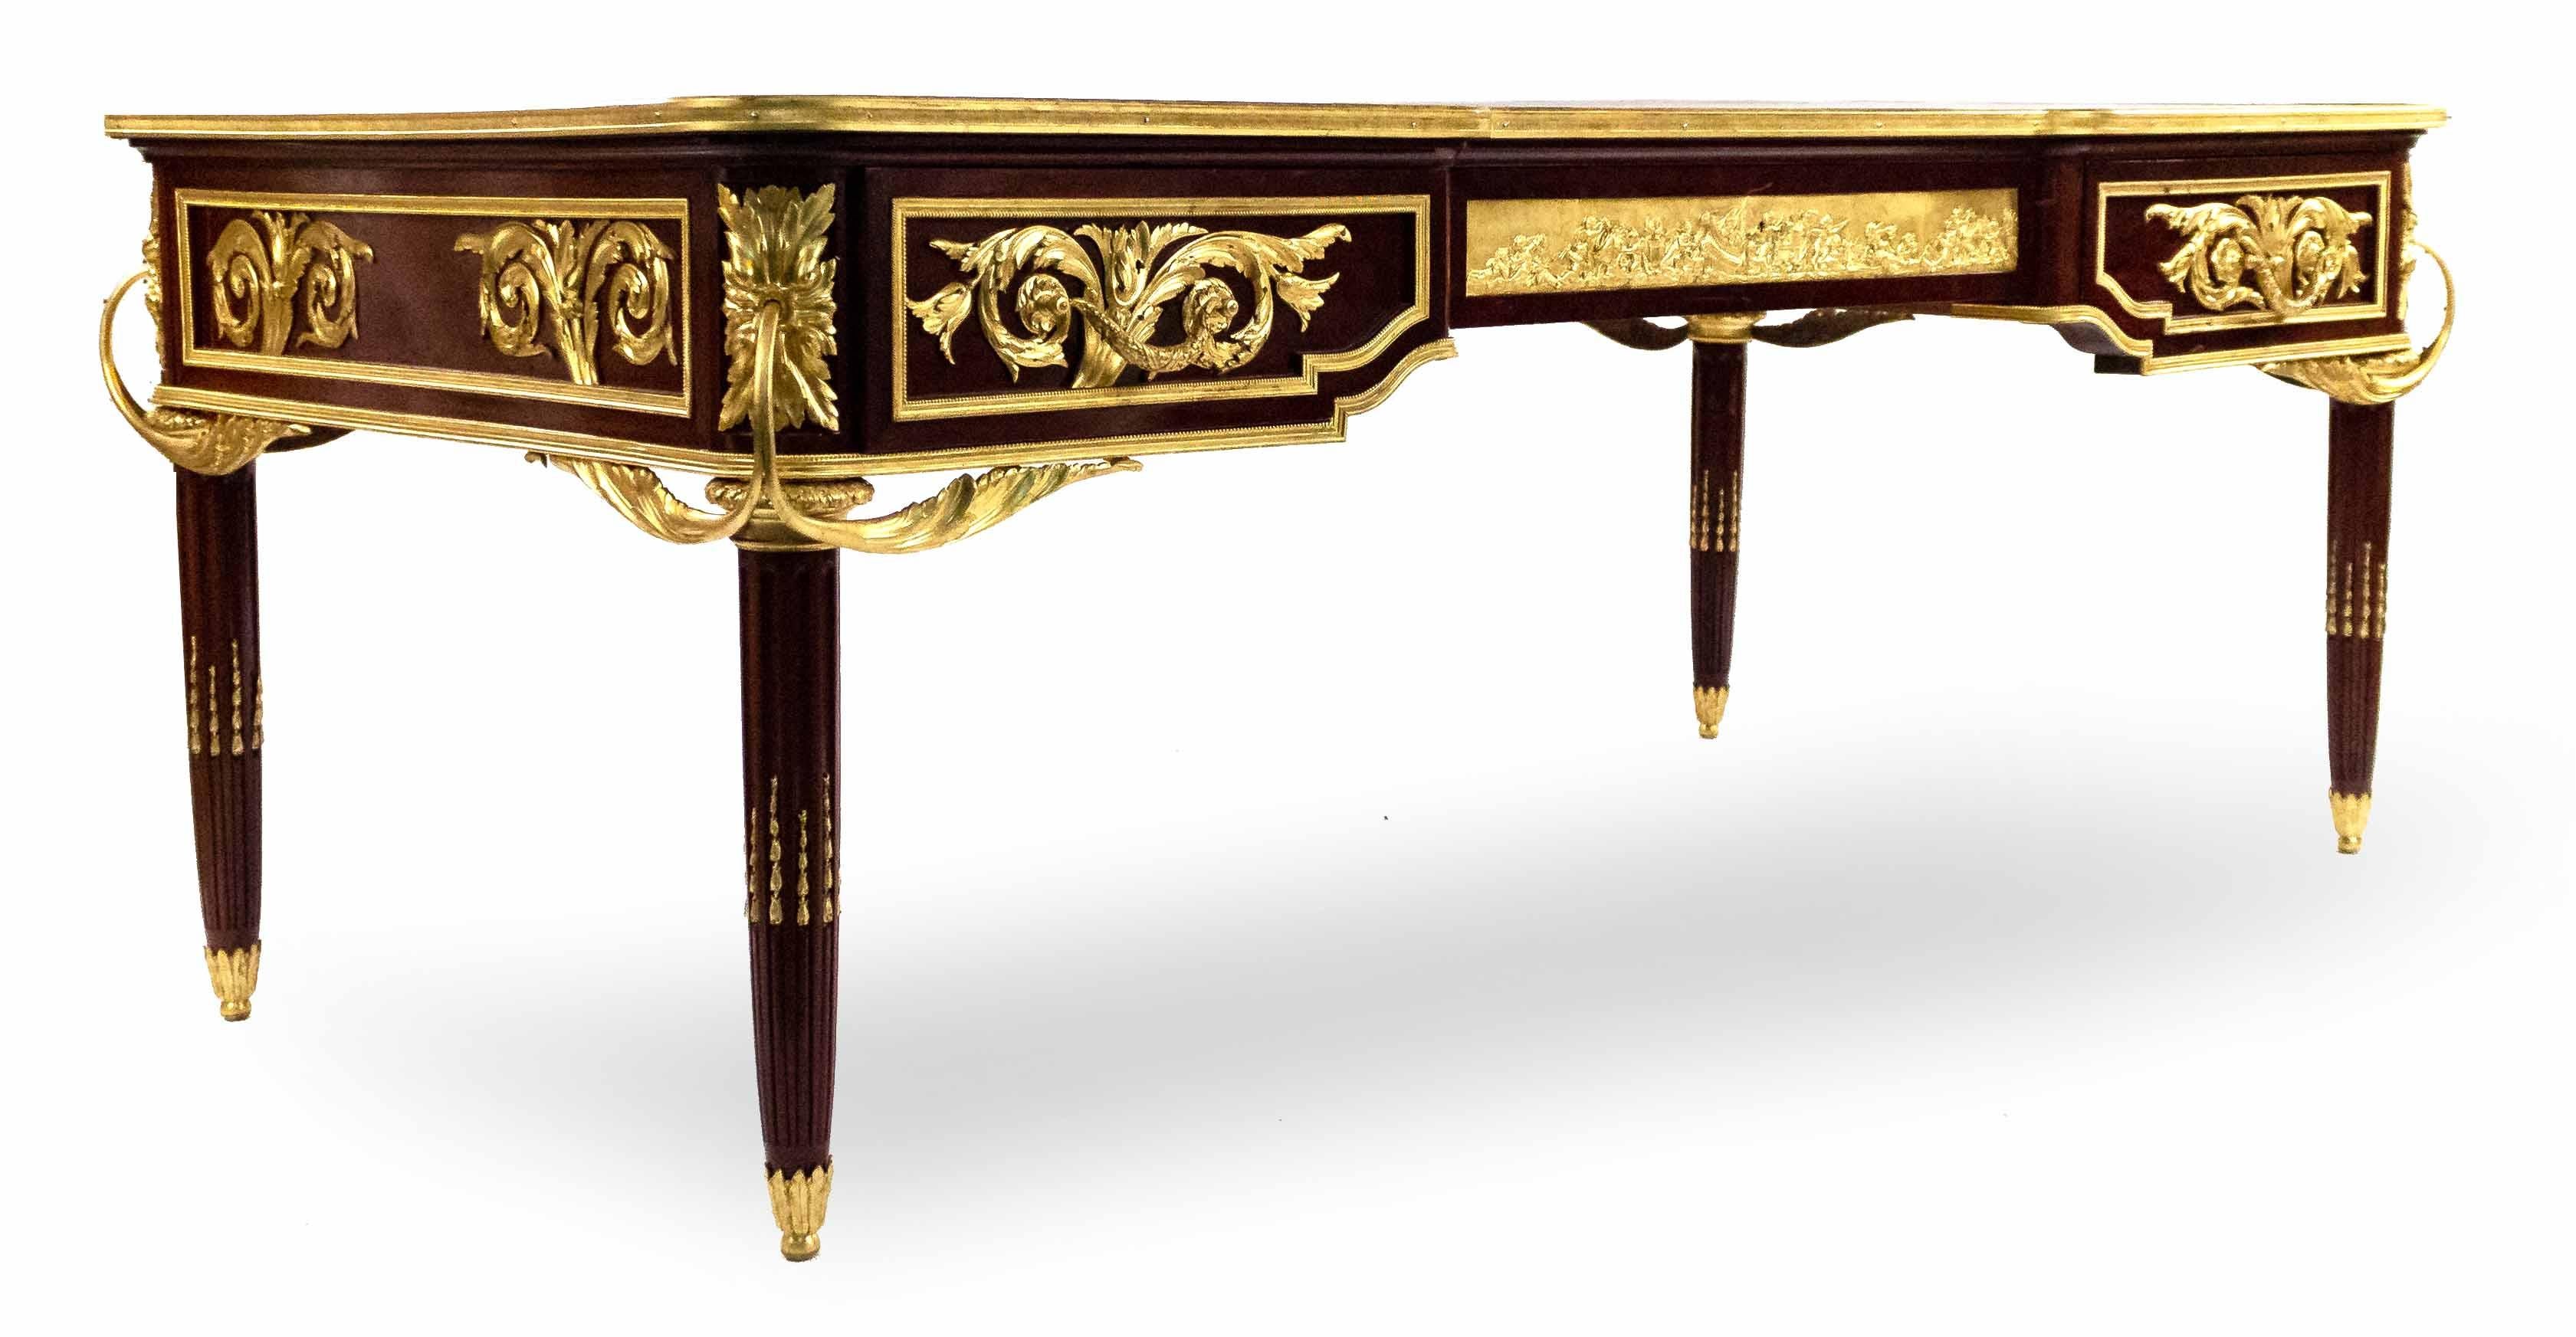 Louis XVI style (19th-20th century) gilt bronze mounted 3-drawer bureau plat desk having a center plaque depicting an allegorical putti scene with a gold embossed leather top.